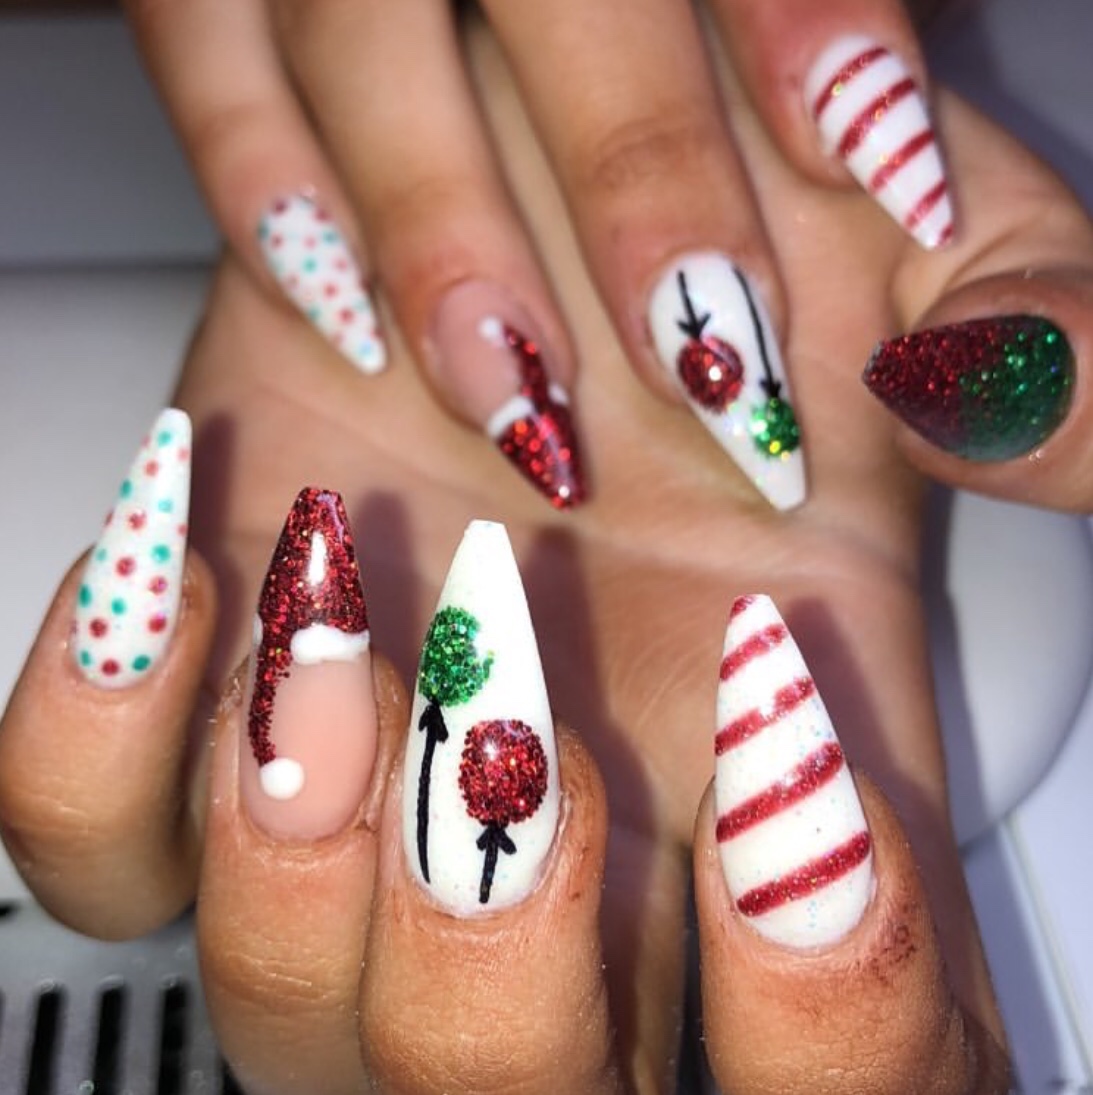 26 Simple Yet Chic Acrylic Nail Designs For Christmas 2019 - The Glossychic